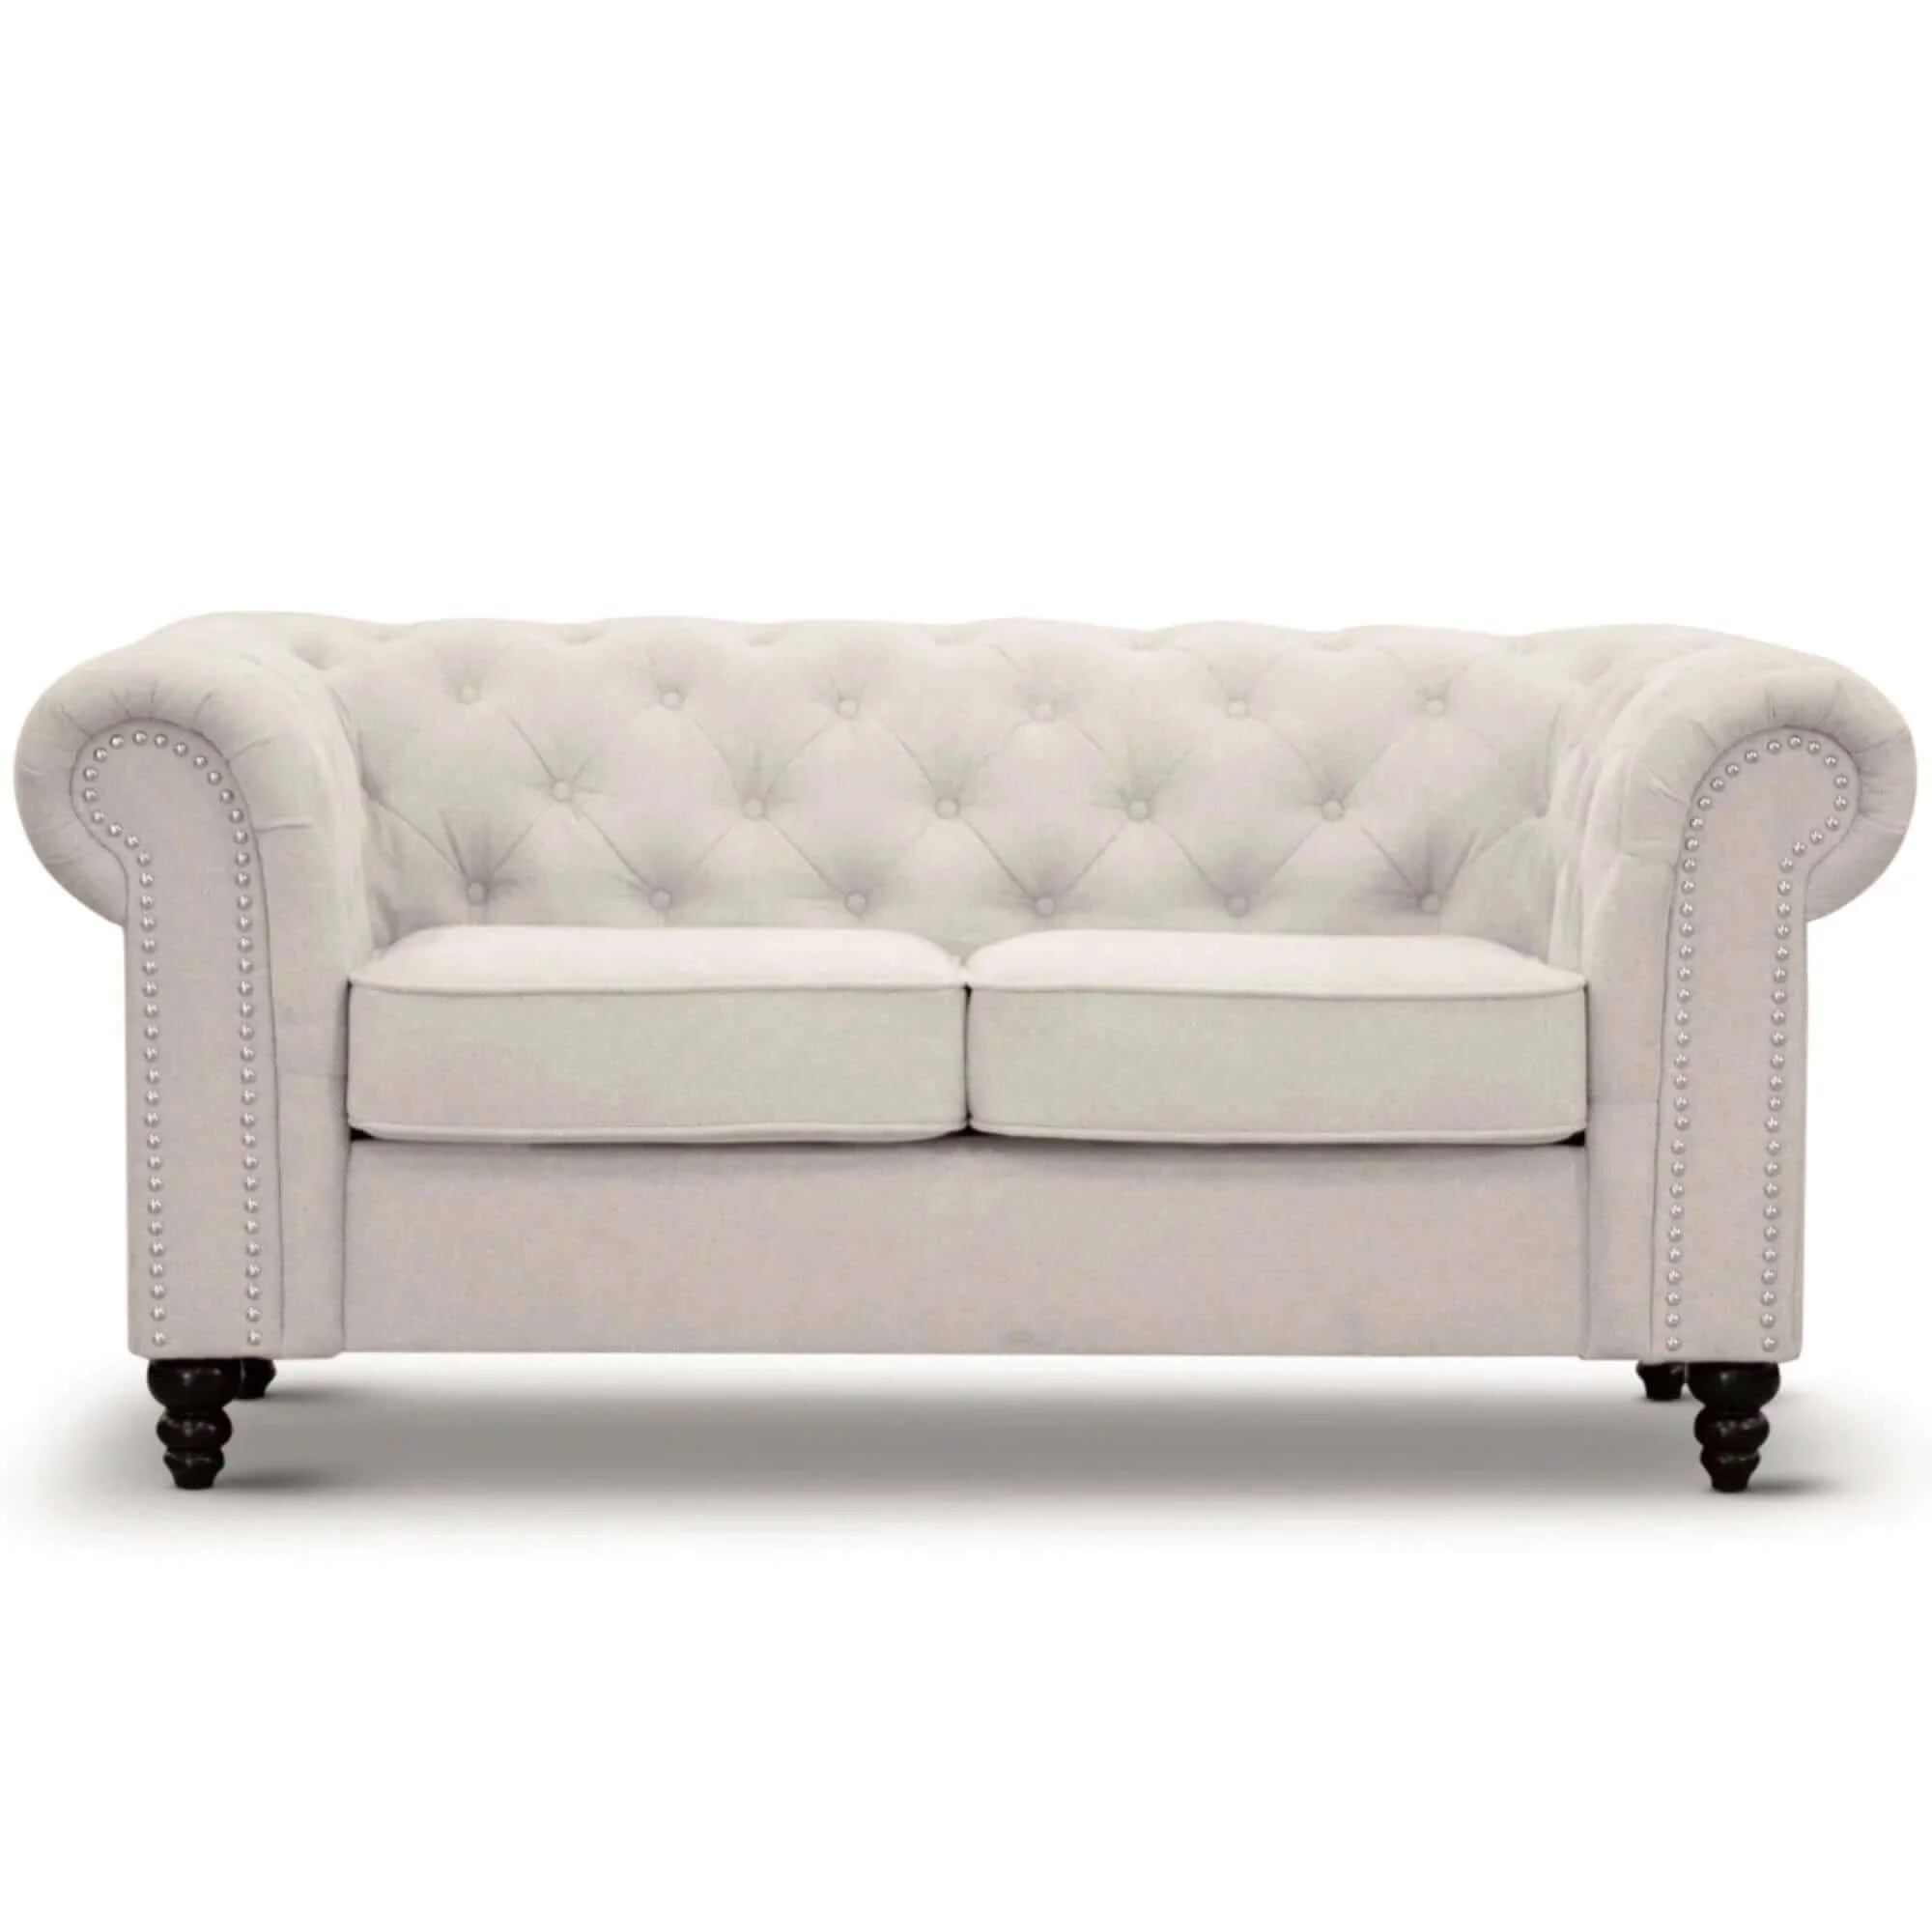 Buy mellowly 3 + 2 seater sofa fabric uplholstered chesterfield lounge couch - beige - upinteriors-Upinteriors